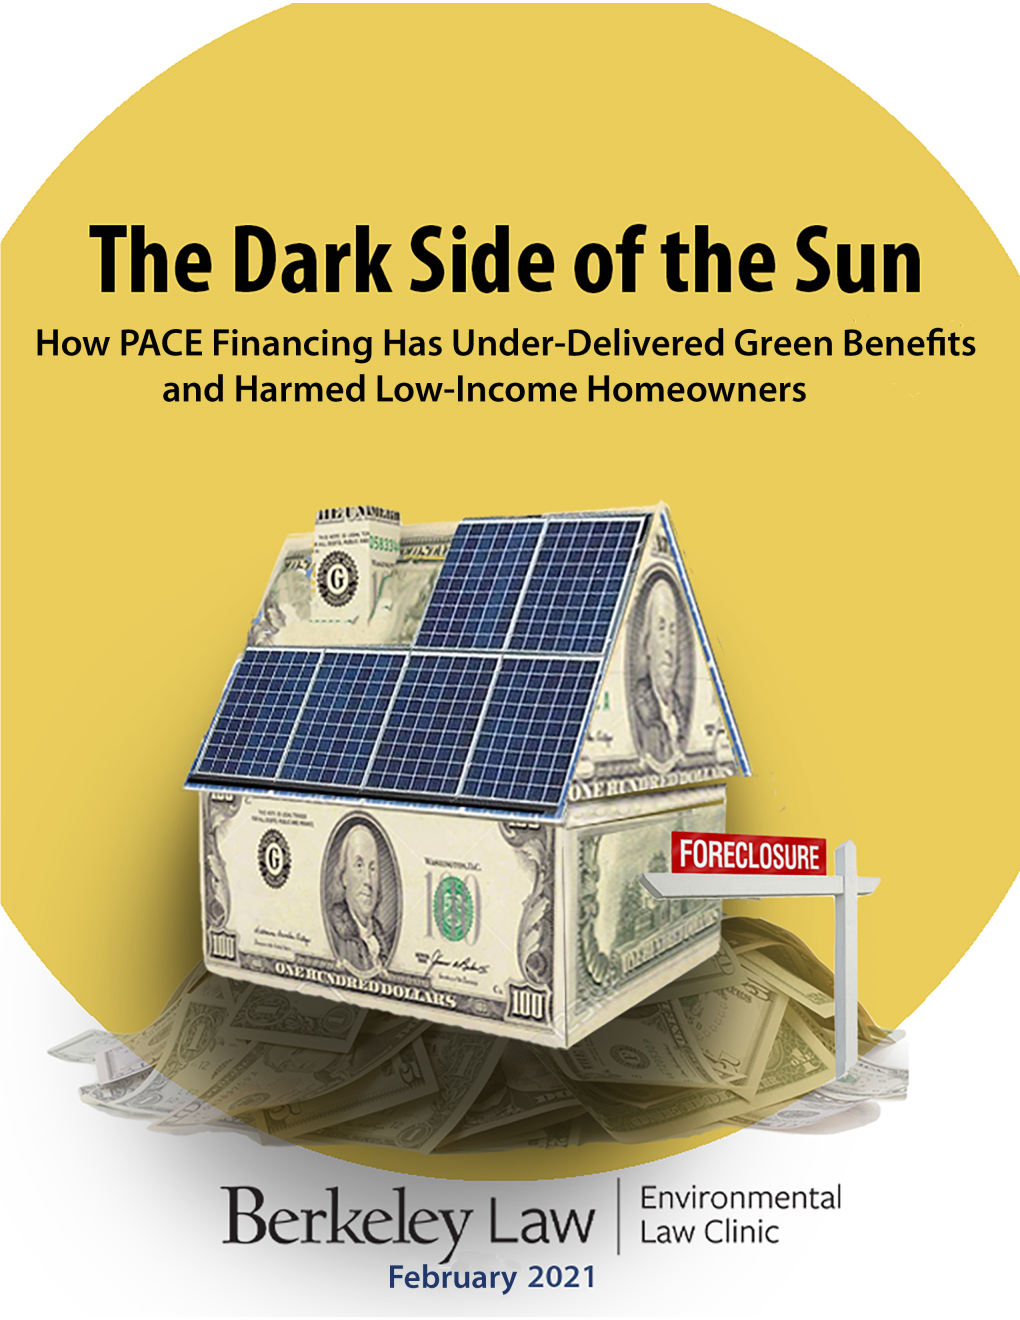 THE DARK SIDE of the SUN: How PACE Financing Has Under-Delivered Green Benefits & Harmed Low-Income Homeowners 1 INTRODUCTION